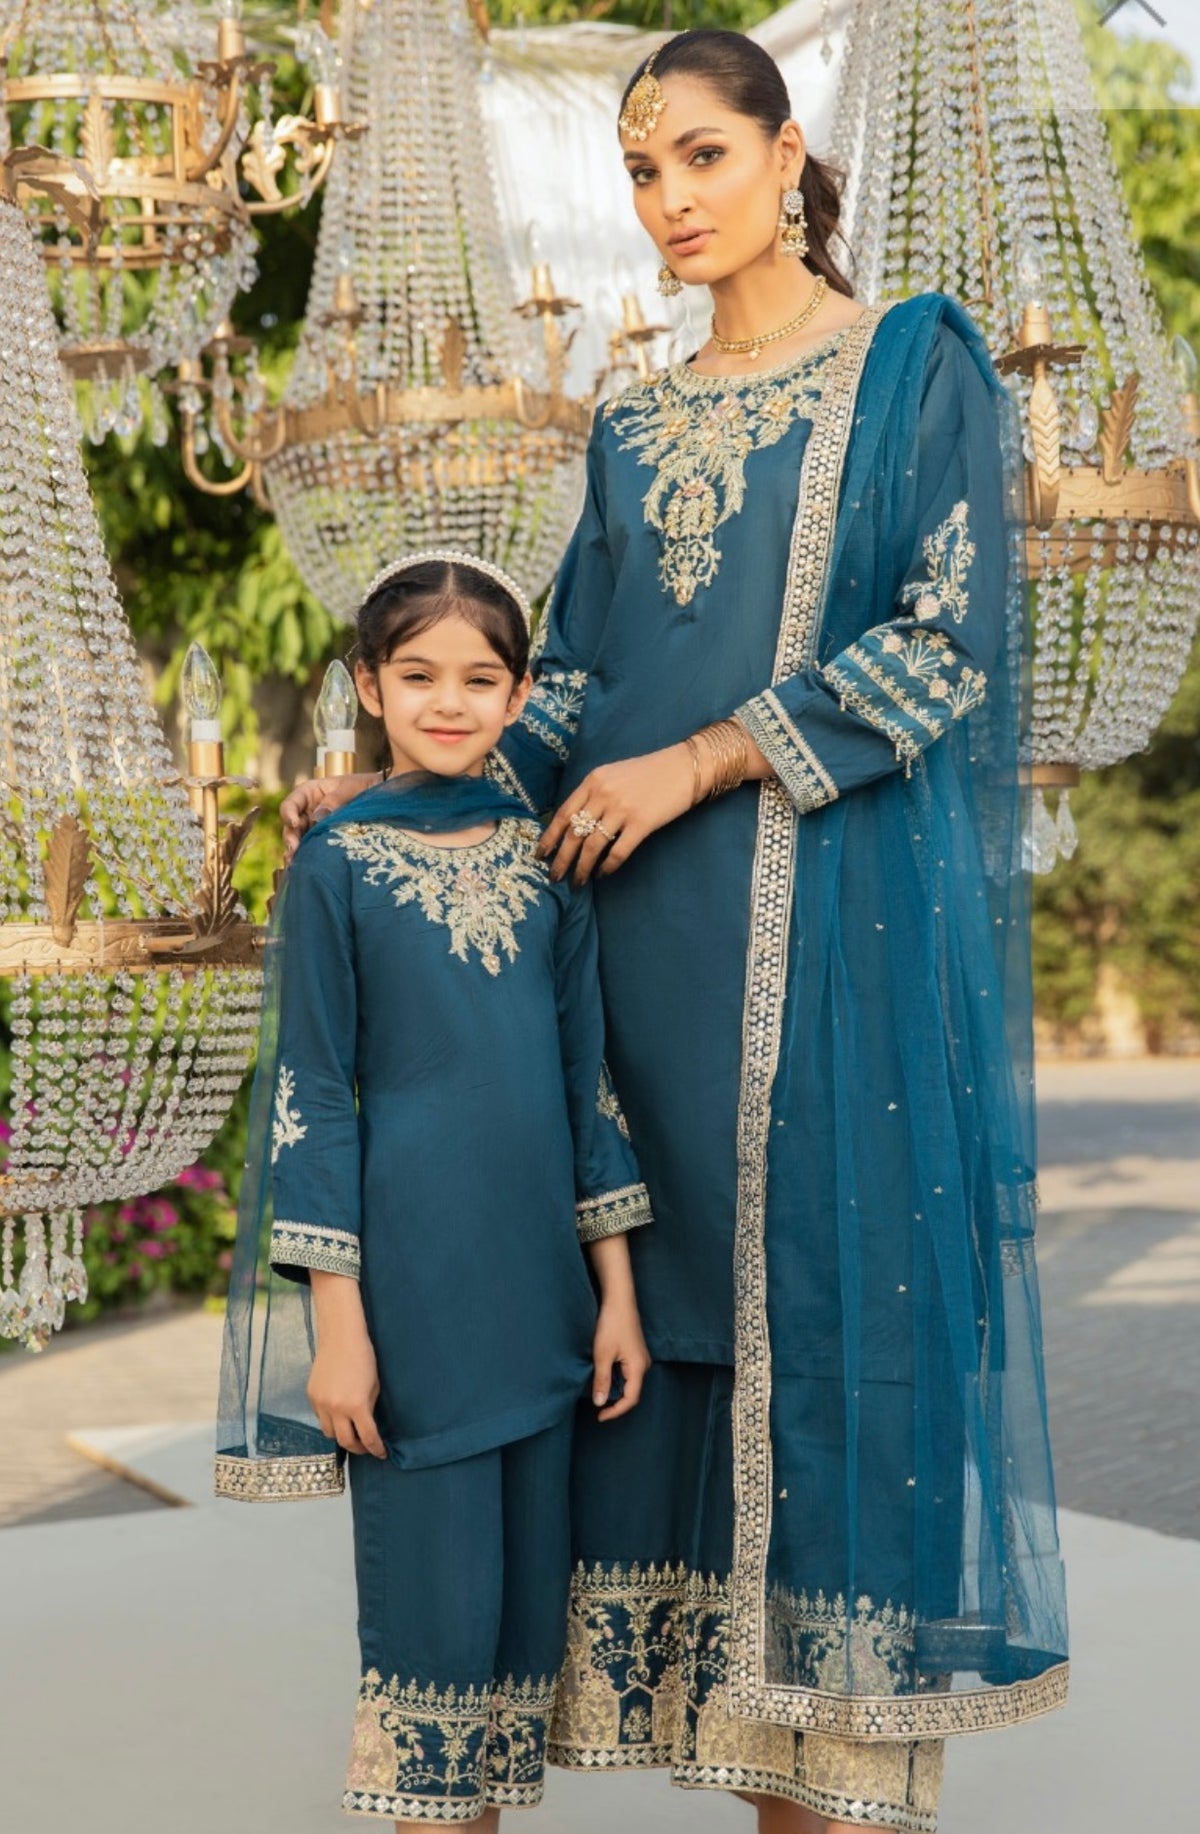 SIMRANS Ivana luxe Mummy & Me /kids collection 3 piece readymade suit in Teal SIL08